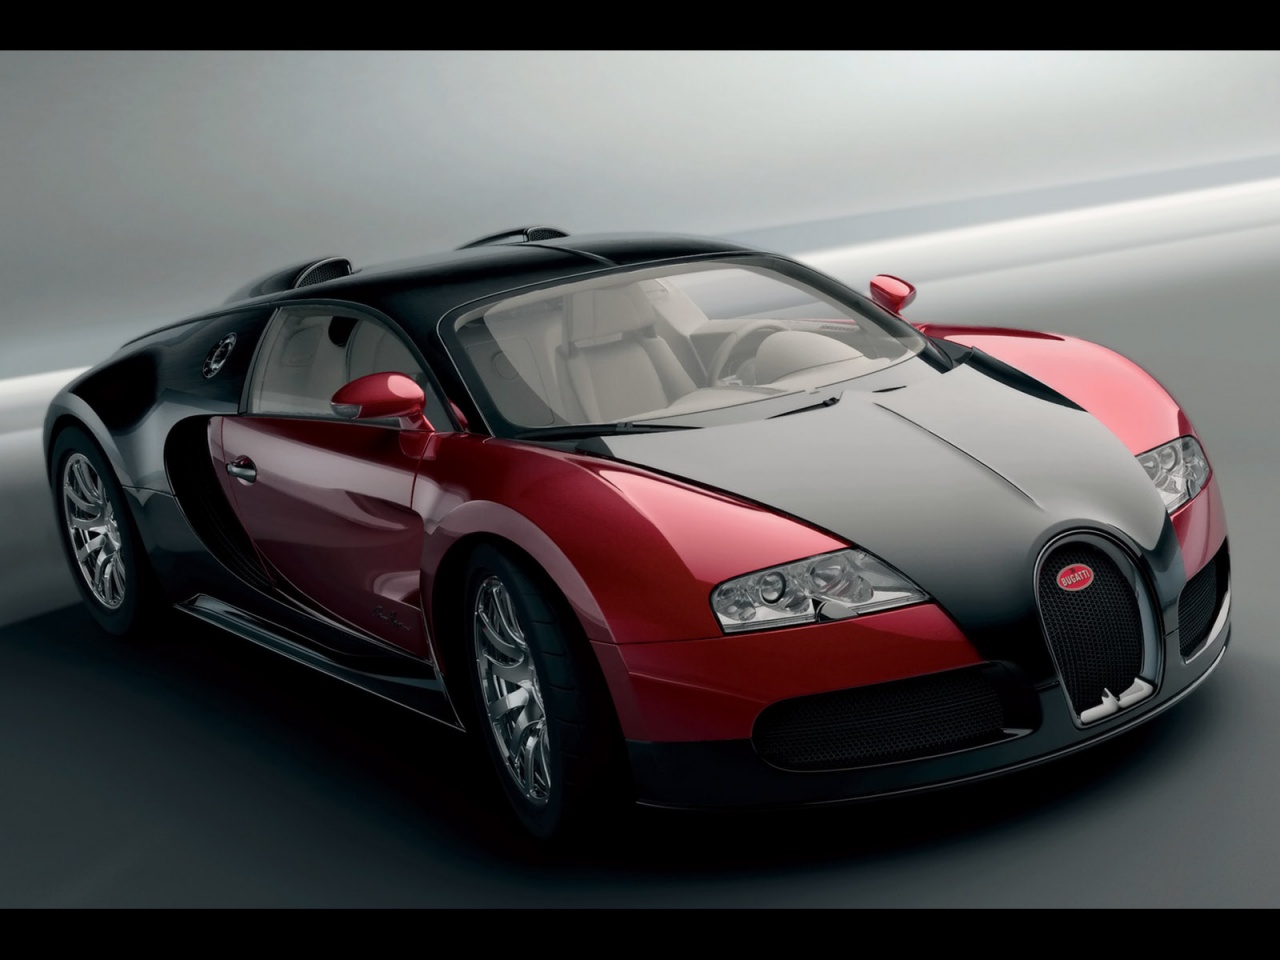 Bugatti full hd hdtv fhd 1080p wallpapers hd desktop backgrounds  1920x1080 images and pictures